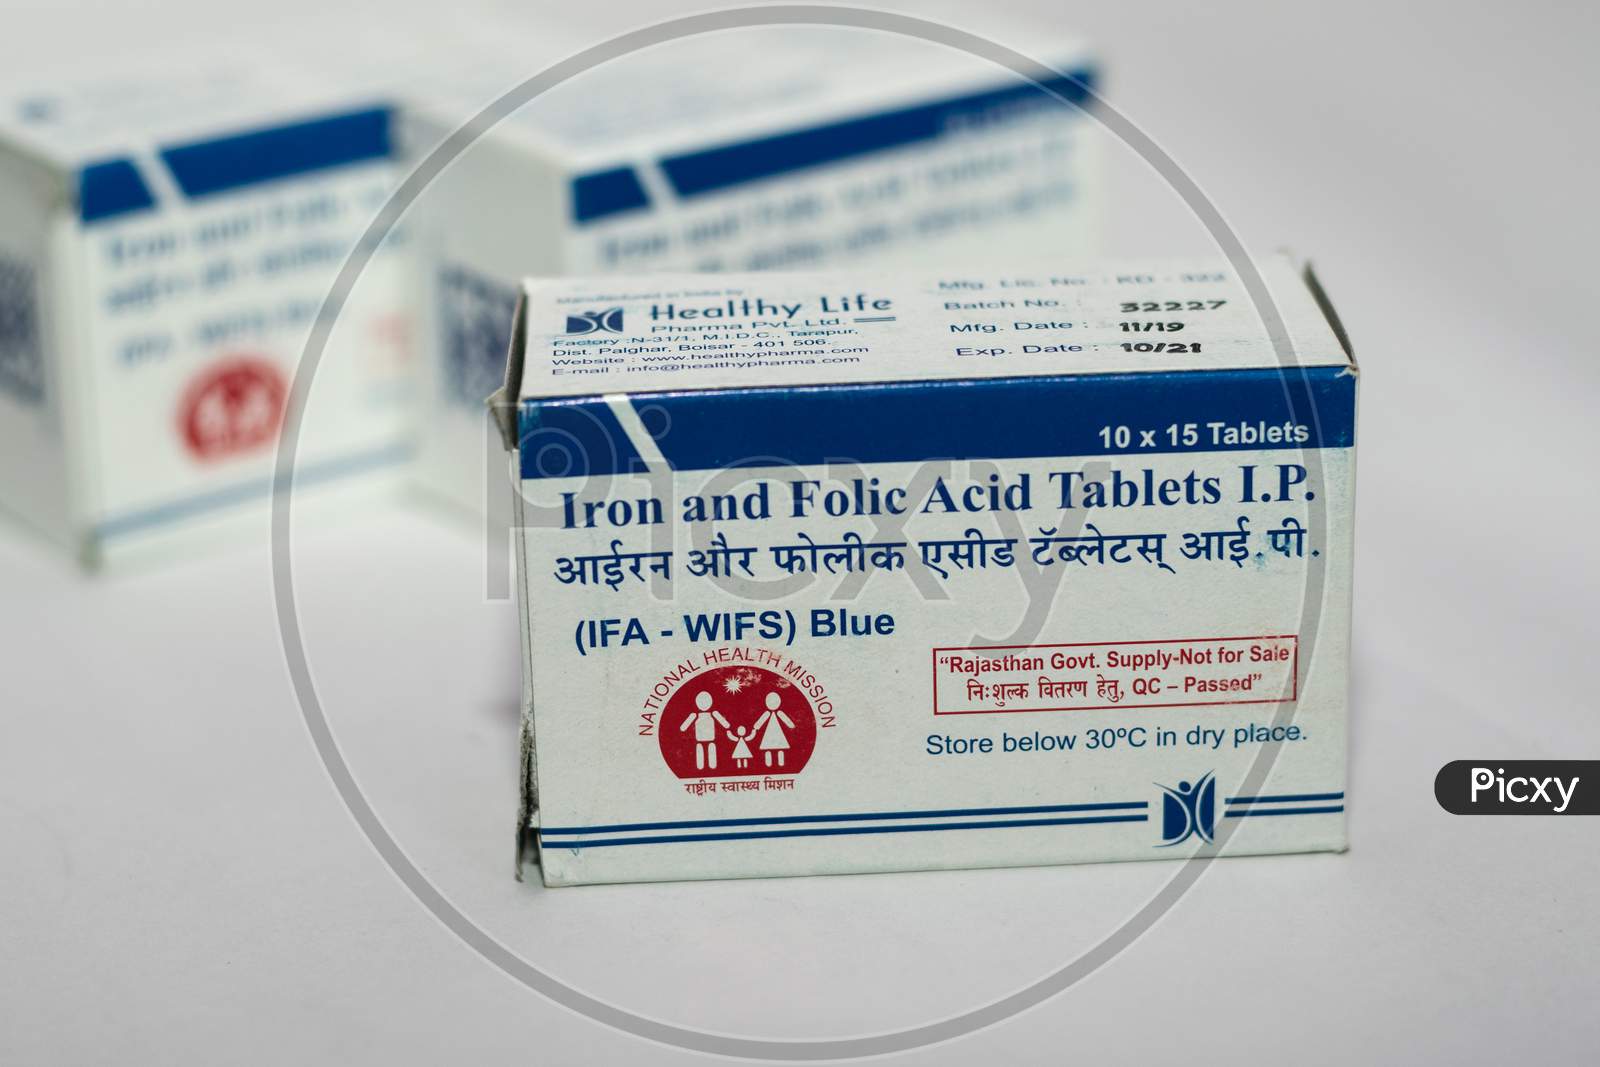 Iron and folic acid tablets provided free by government To reduce the prevalence and severity of anaemia in adolescent population (10-19 years)